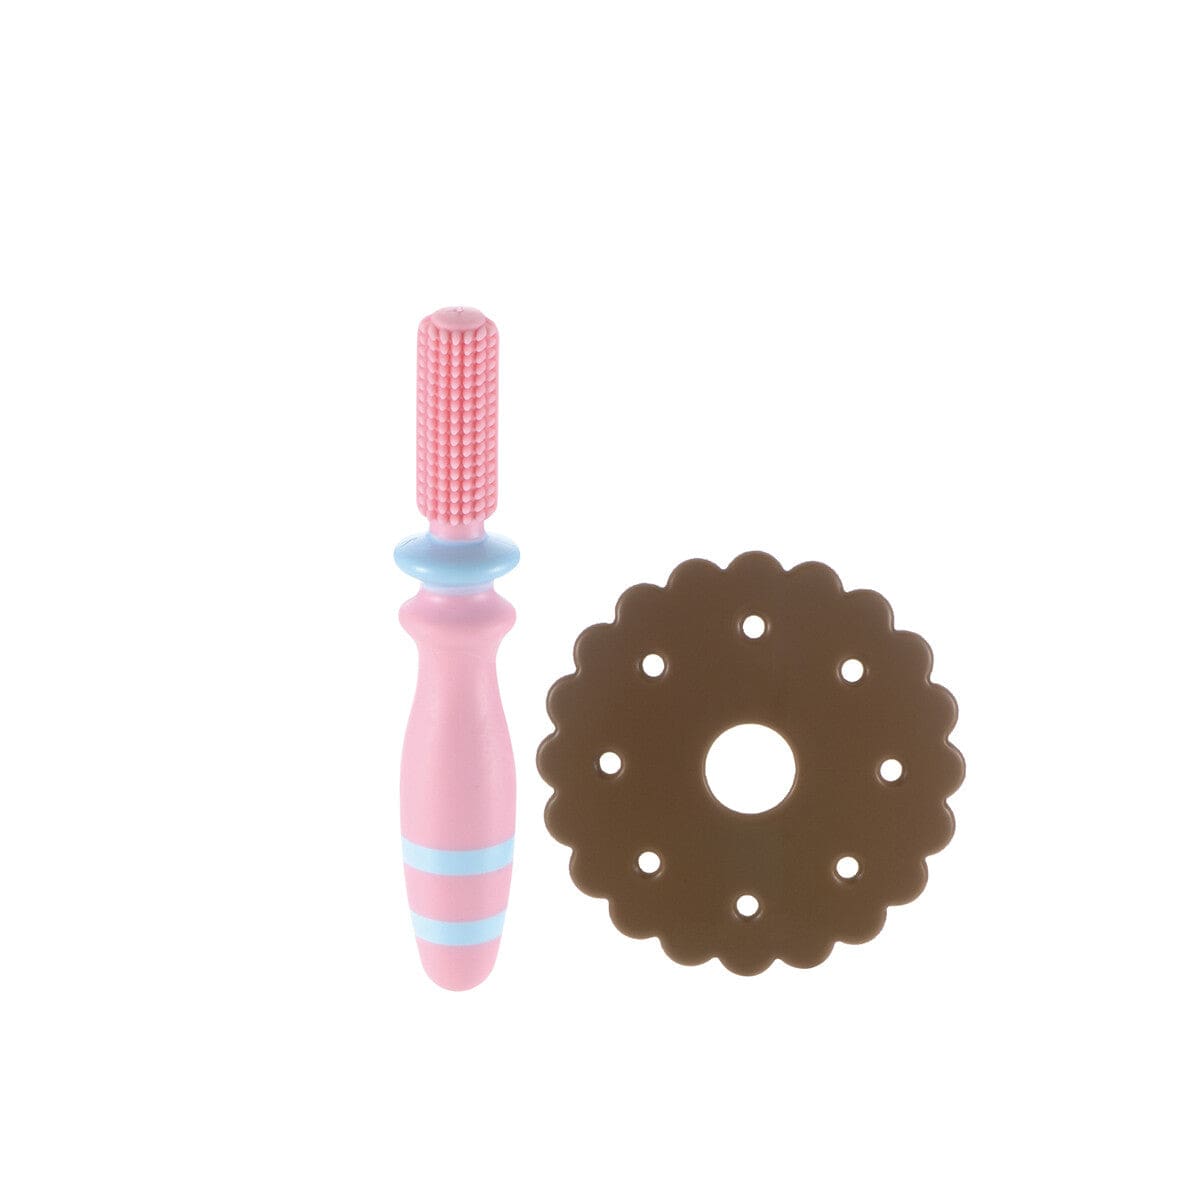 Richell - T.L.I Try Hello Baby Toothbrush -  Baby Toothbrush  Durio.sg